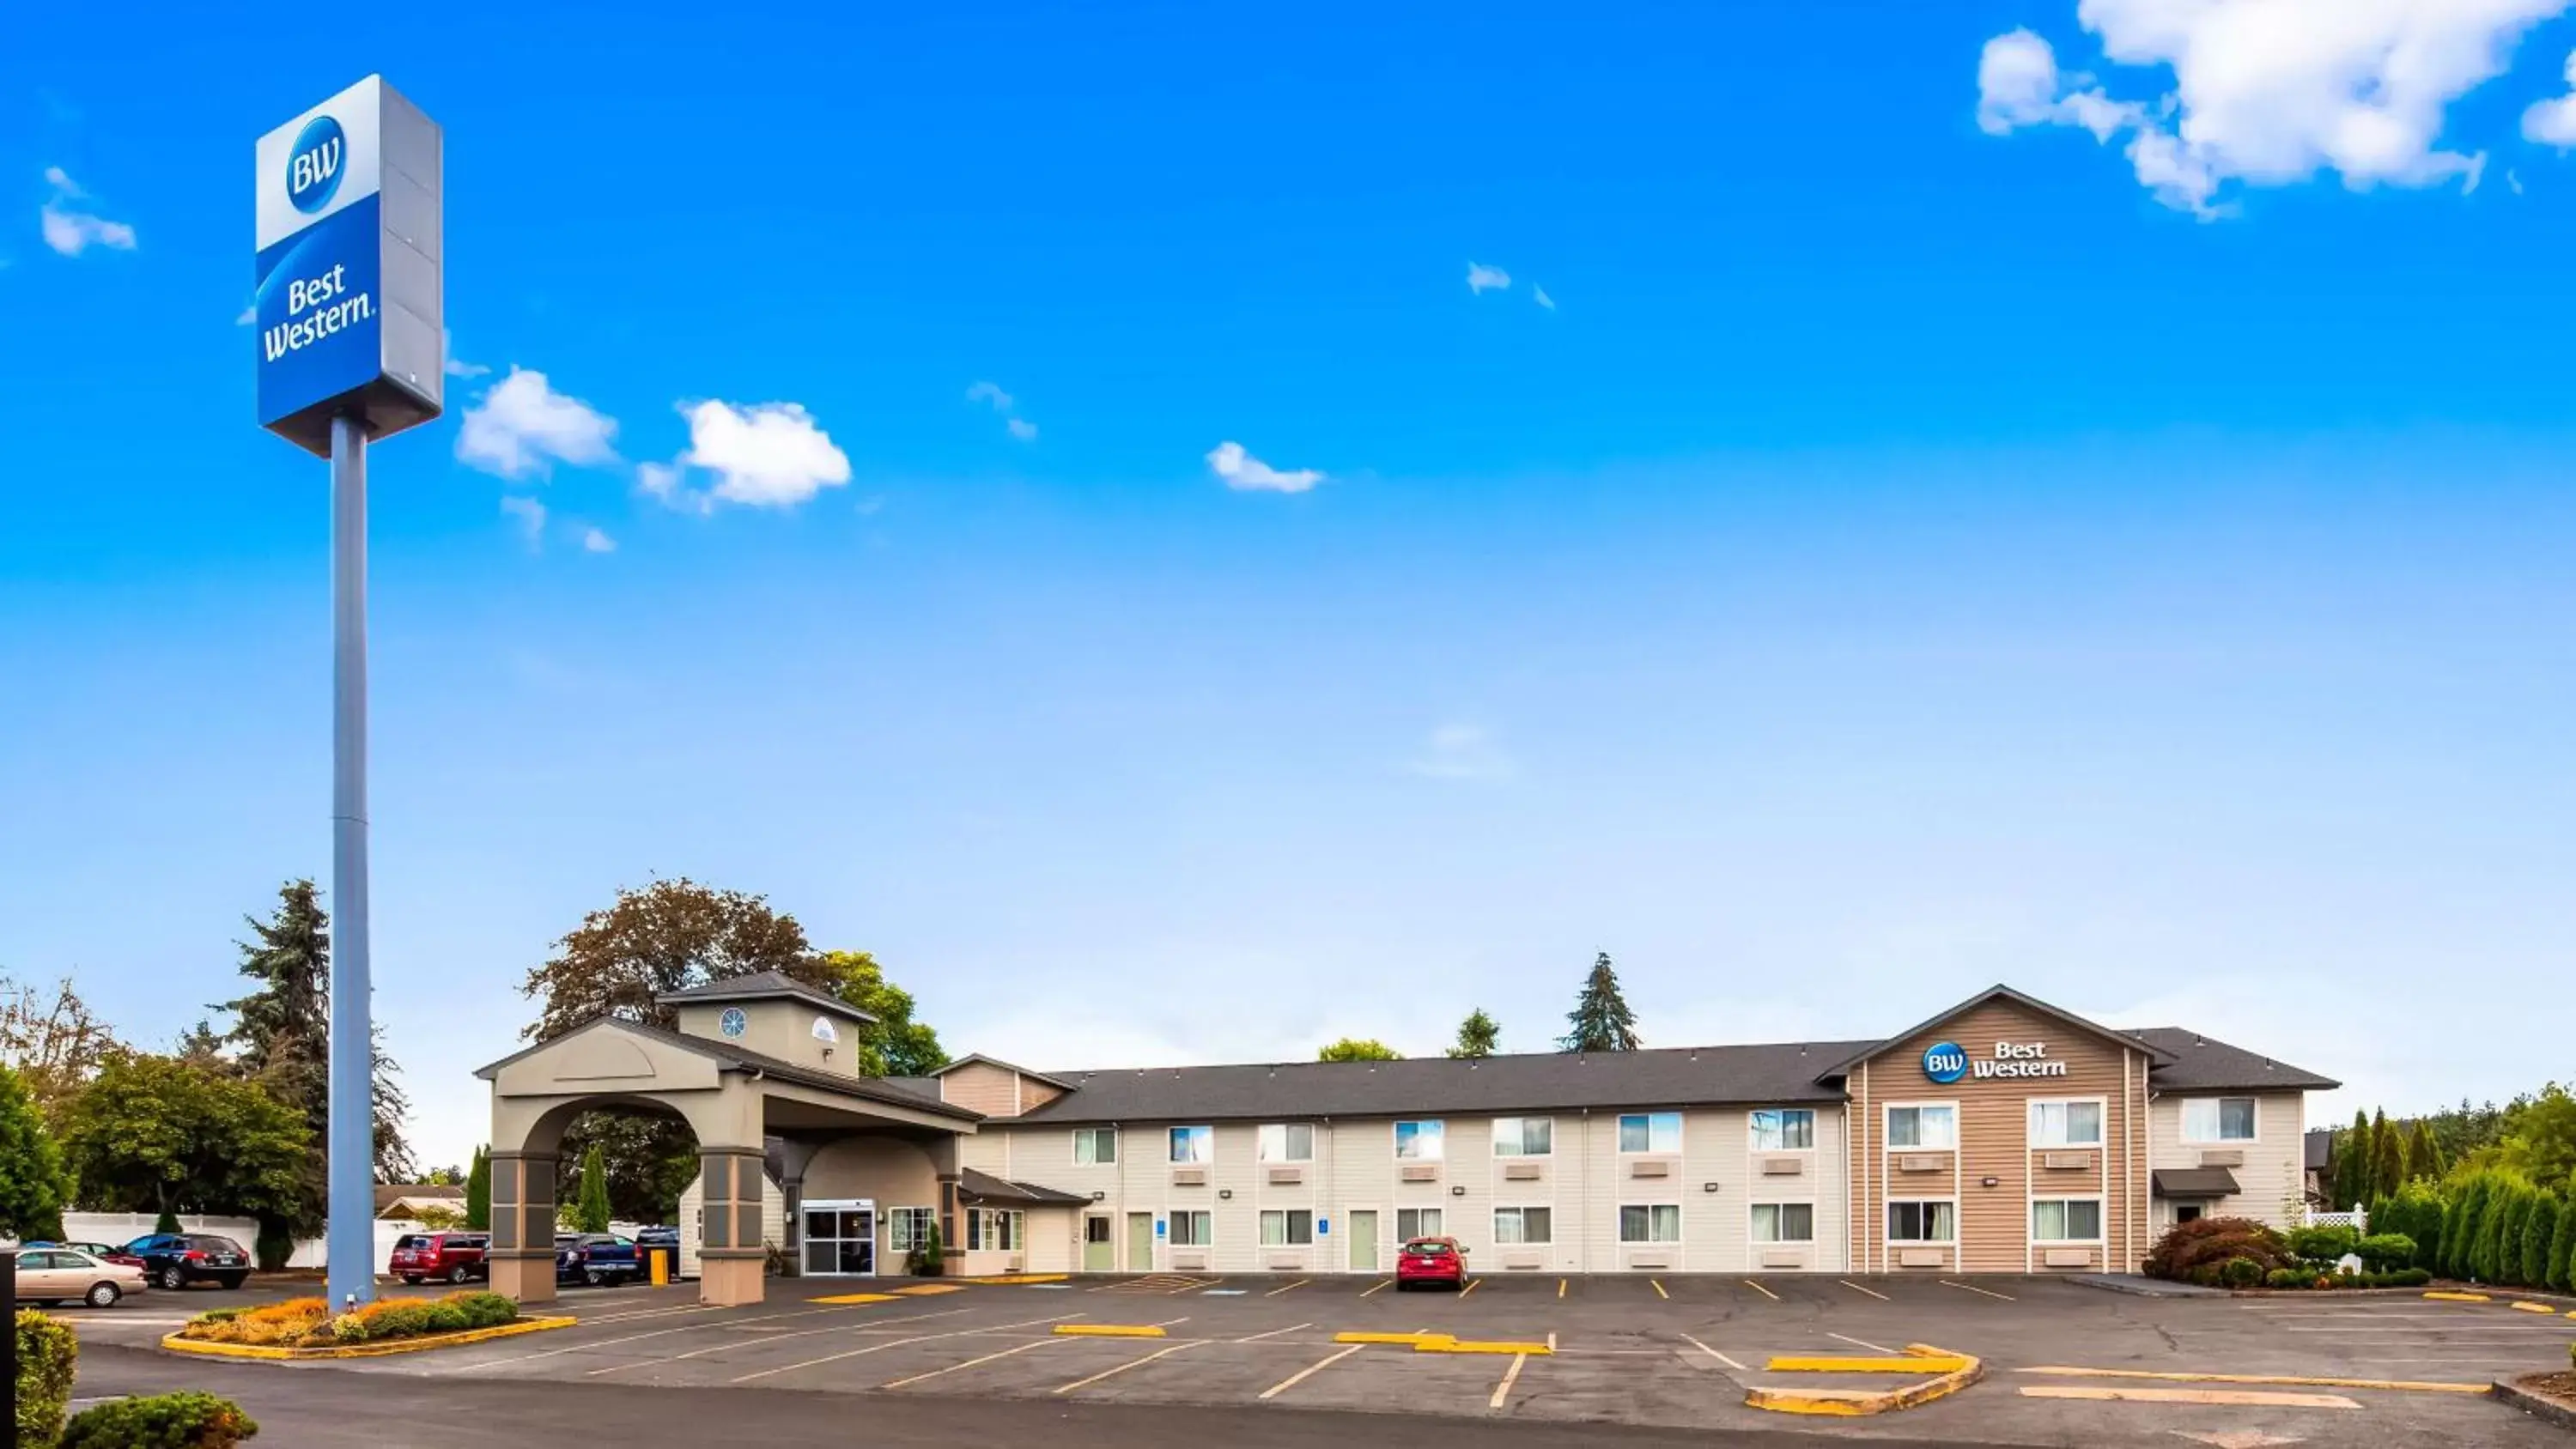 Property Building in Best Western Cottage Grove Inn